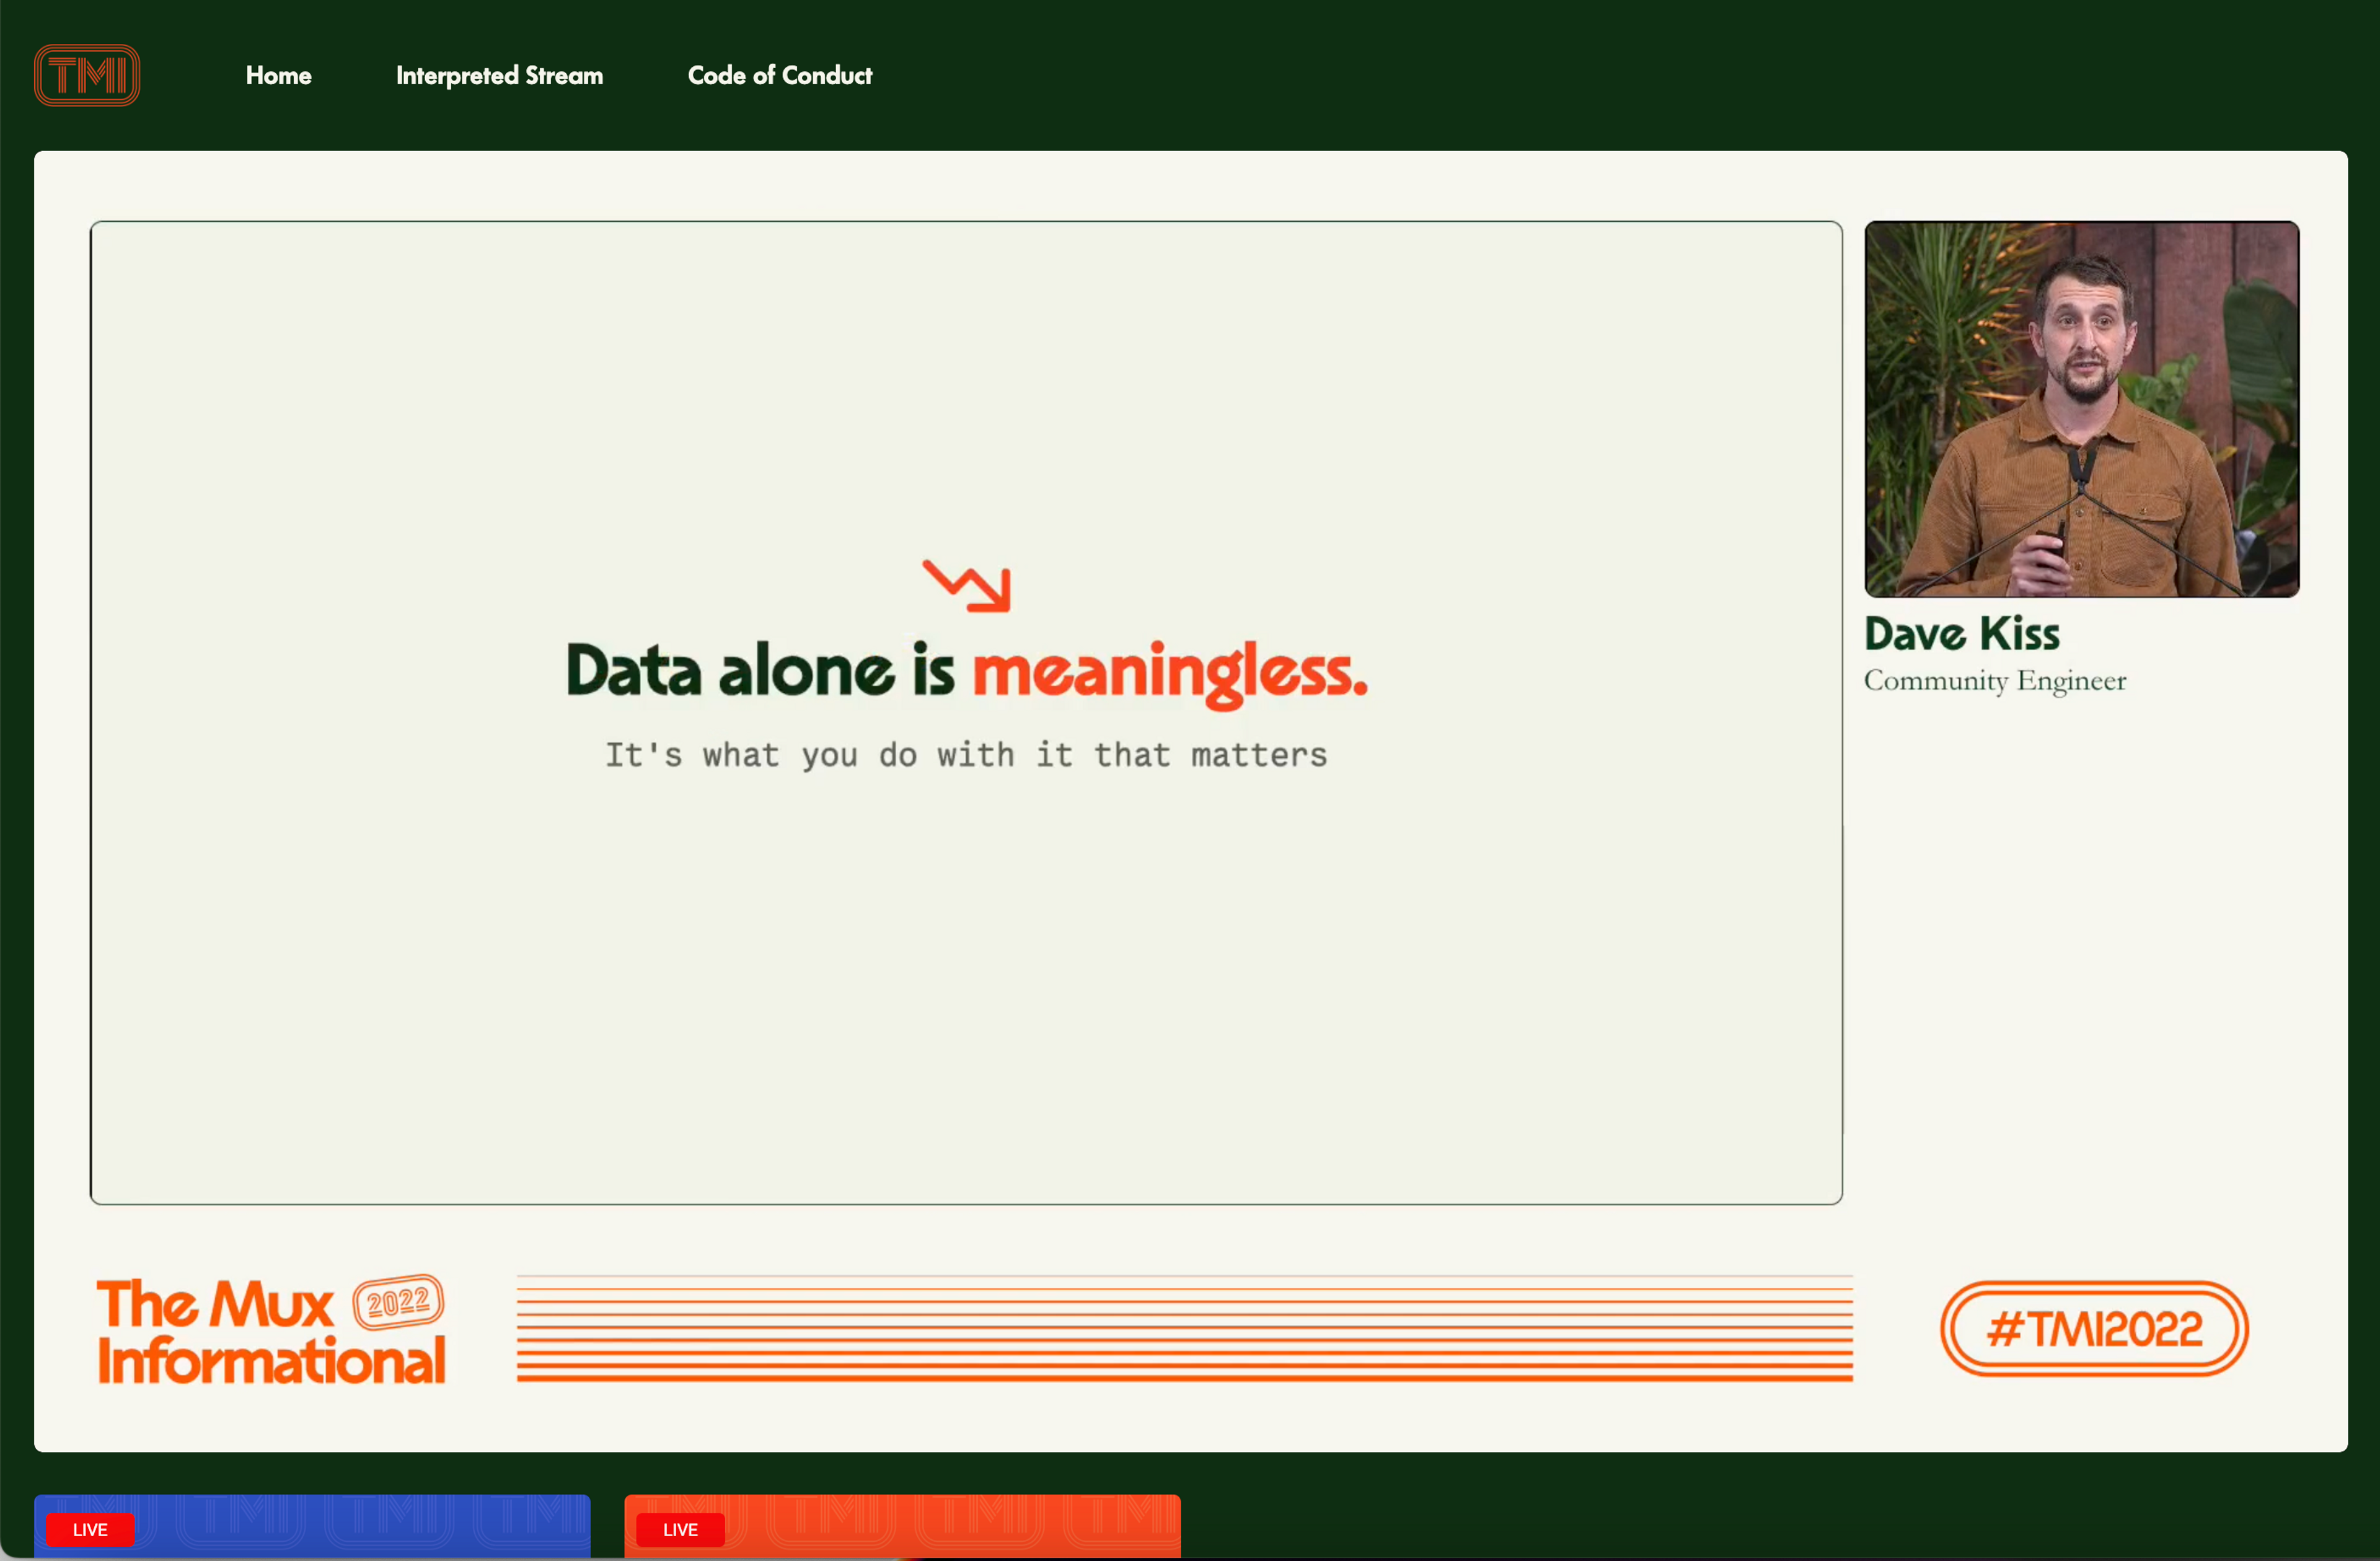 A man with short brown hair wearing a light brown shirt named Dave Kiss (Community Engineer) is depicted in a screenshot next to his presentation slides, which read, "Data along is meaningless. It's what you do with it that matters".